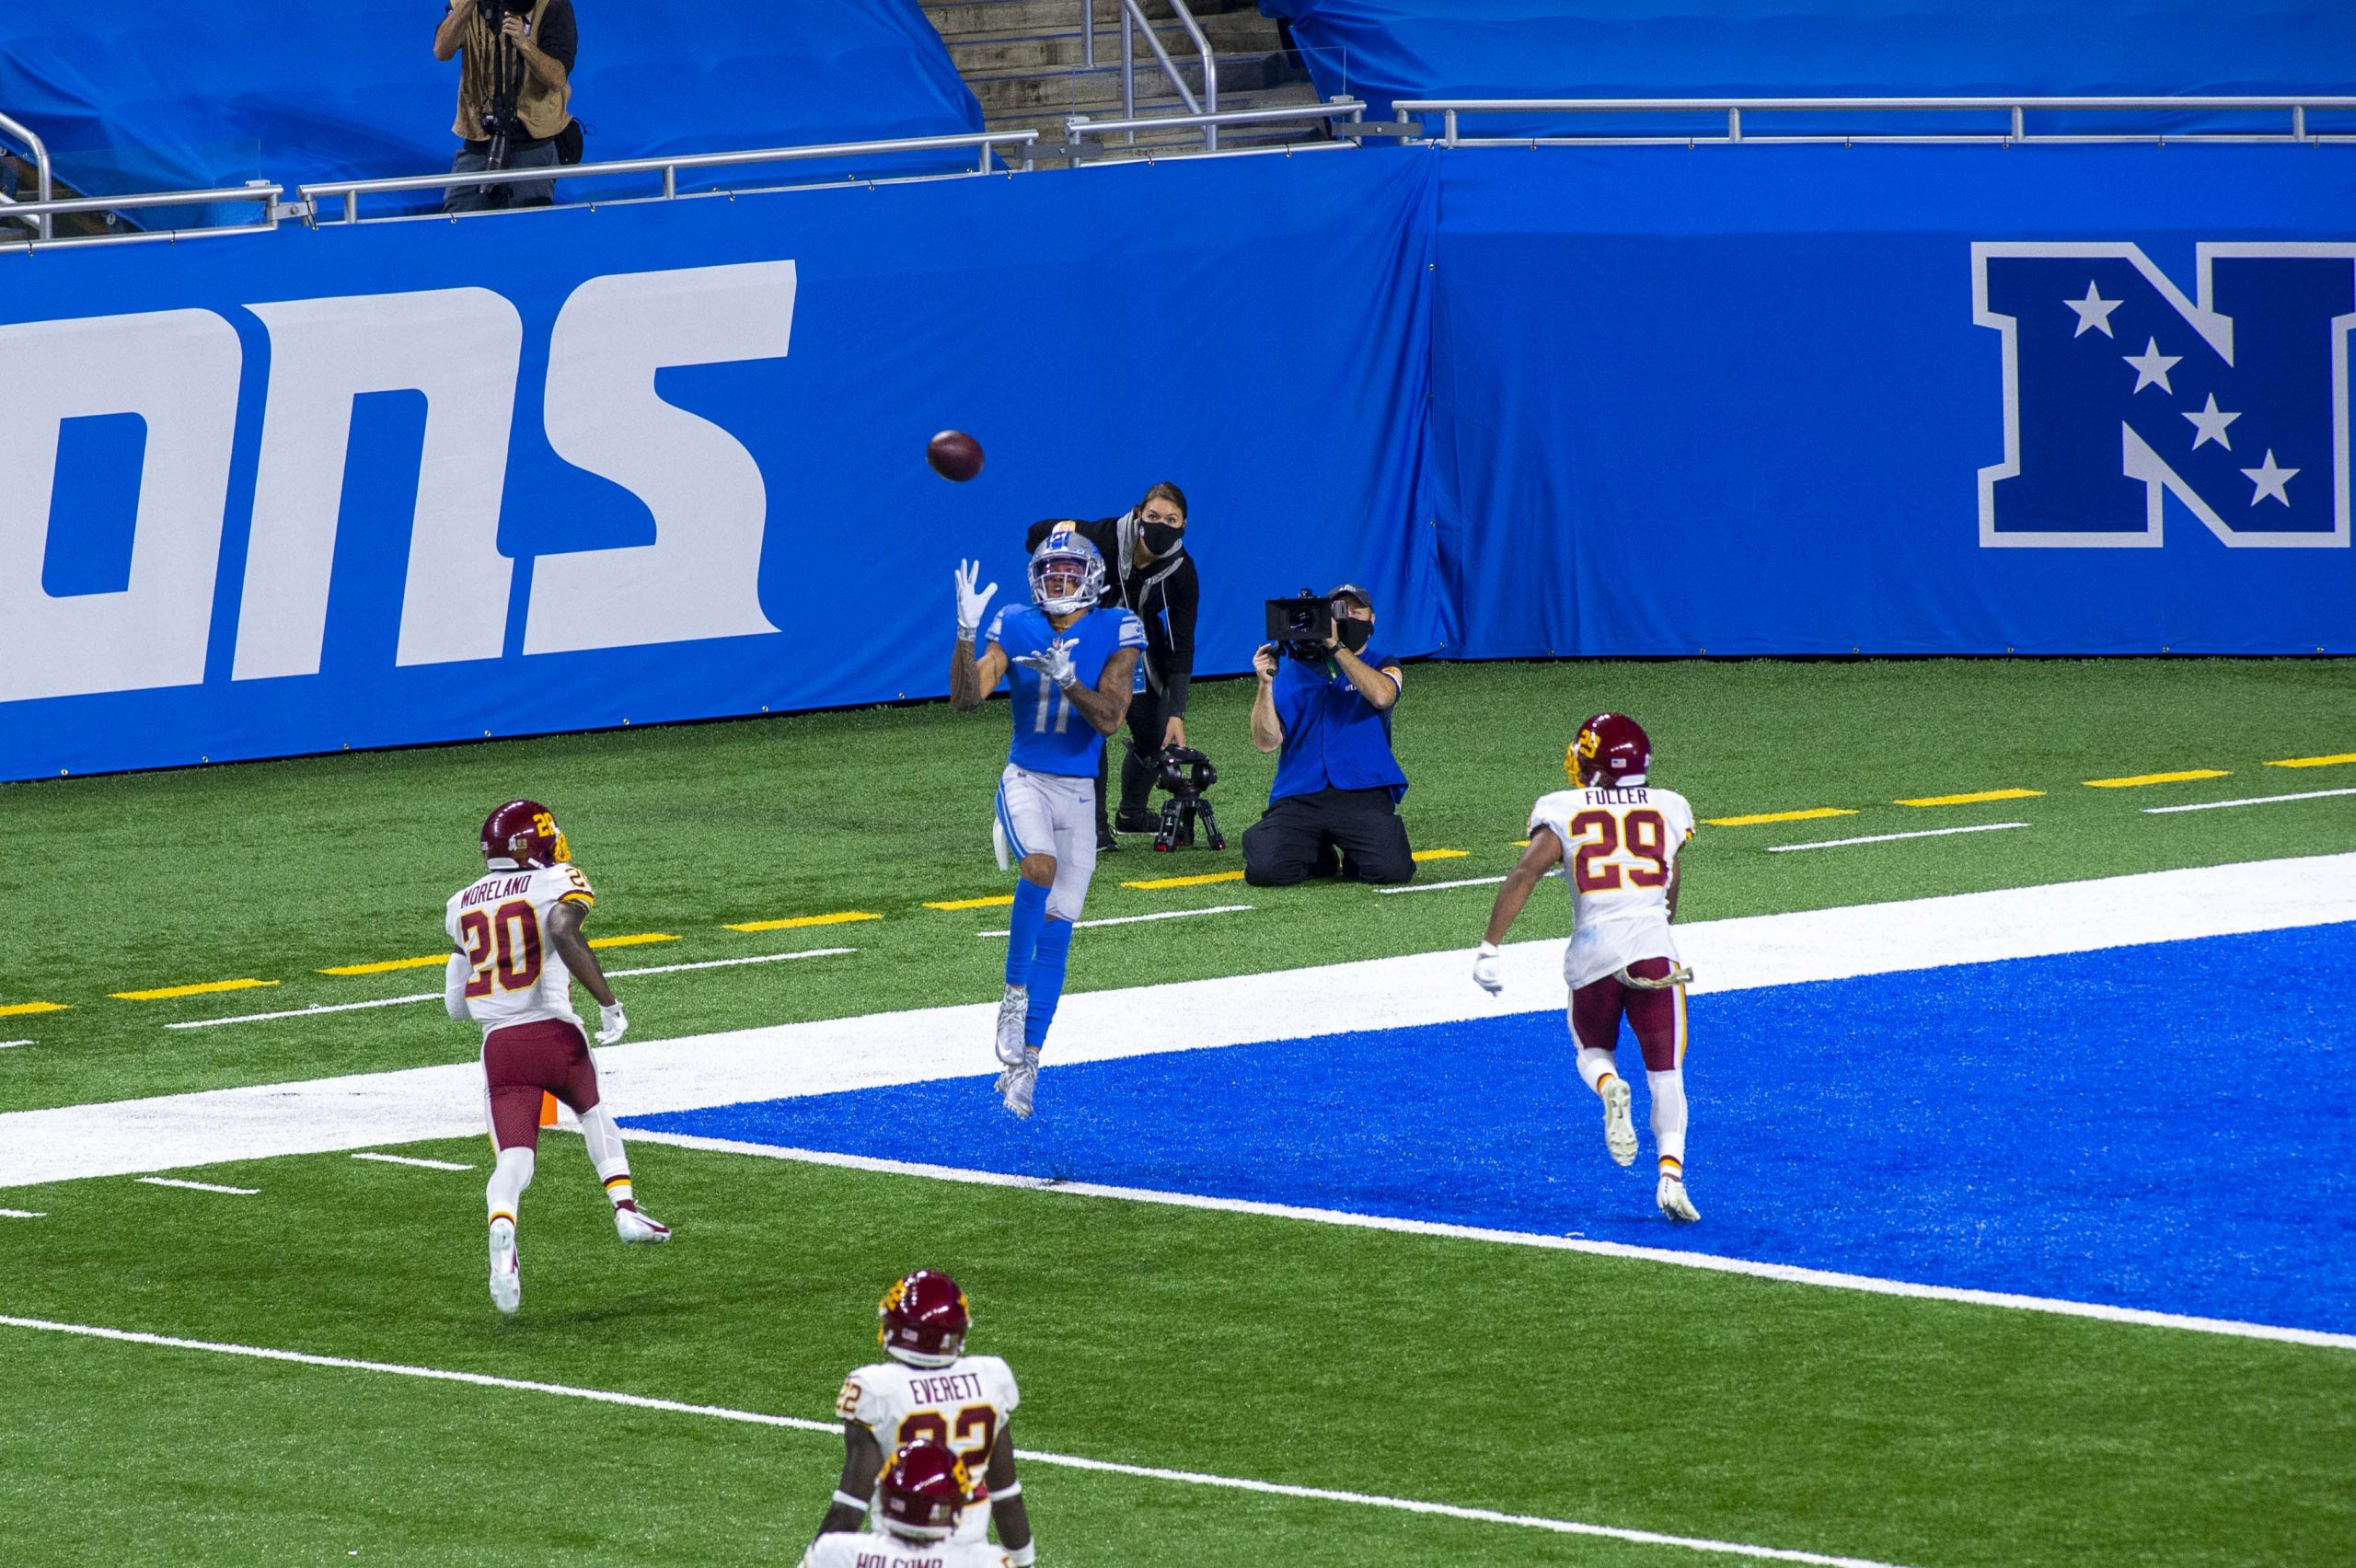 Lions wide receiver Marvin Jones take a leave of absence for family reasons